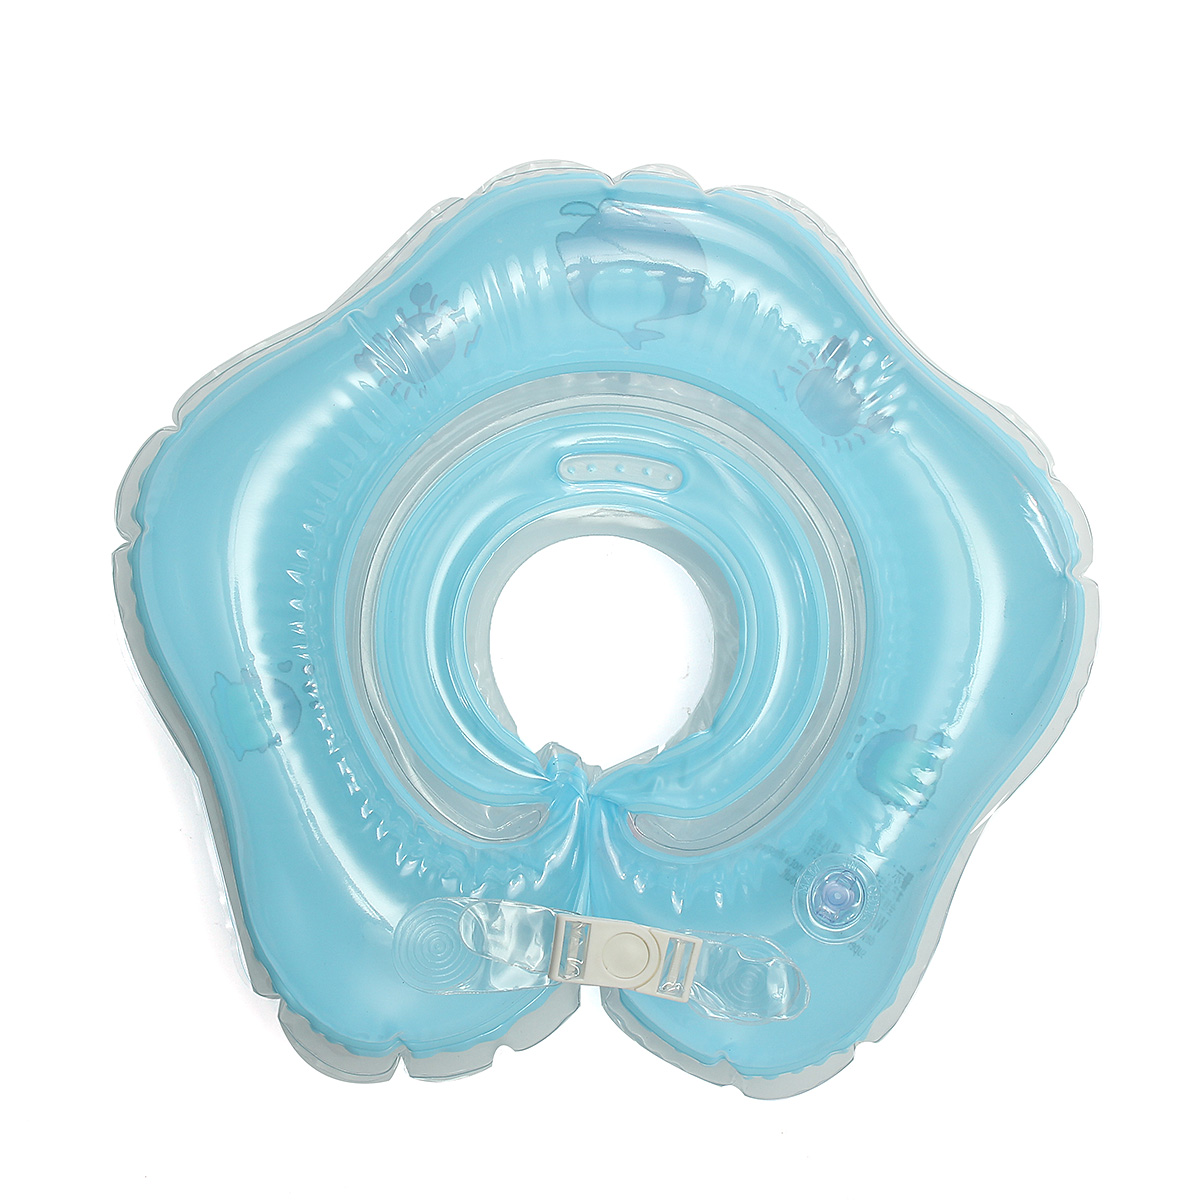 IPReetrade-Baby-Infant-Swimming-Pool-Bath-Neck-Floating-Inflatable-Ring-Built-in-Belt-1169362